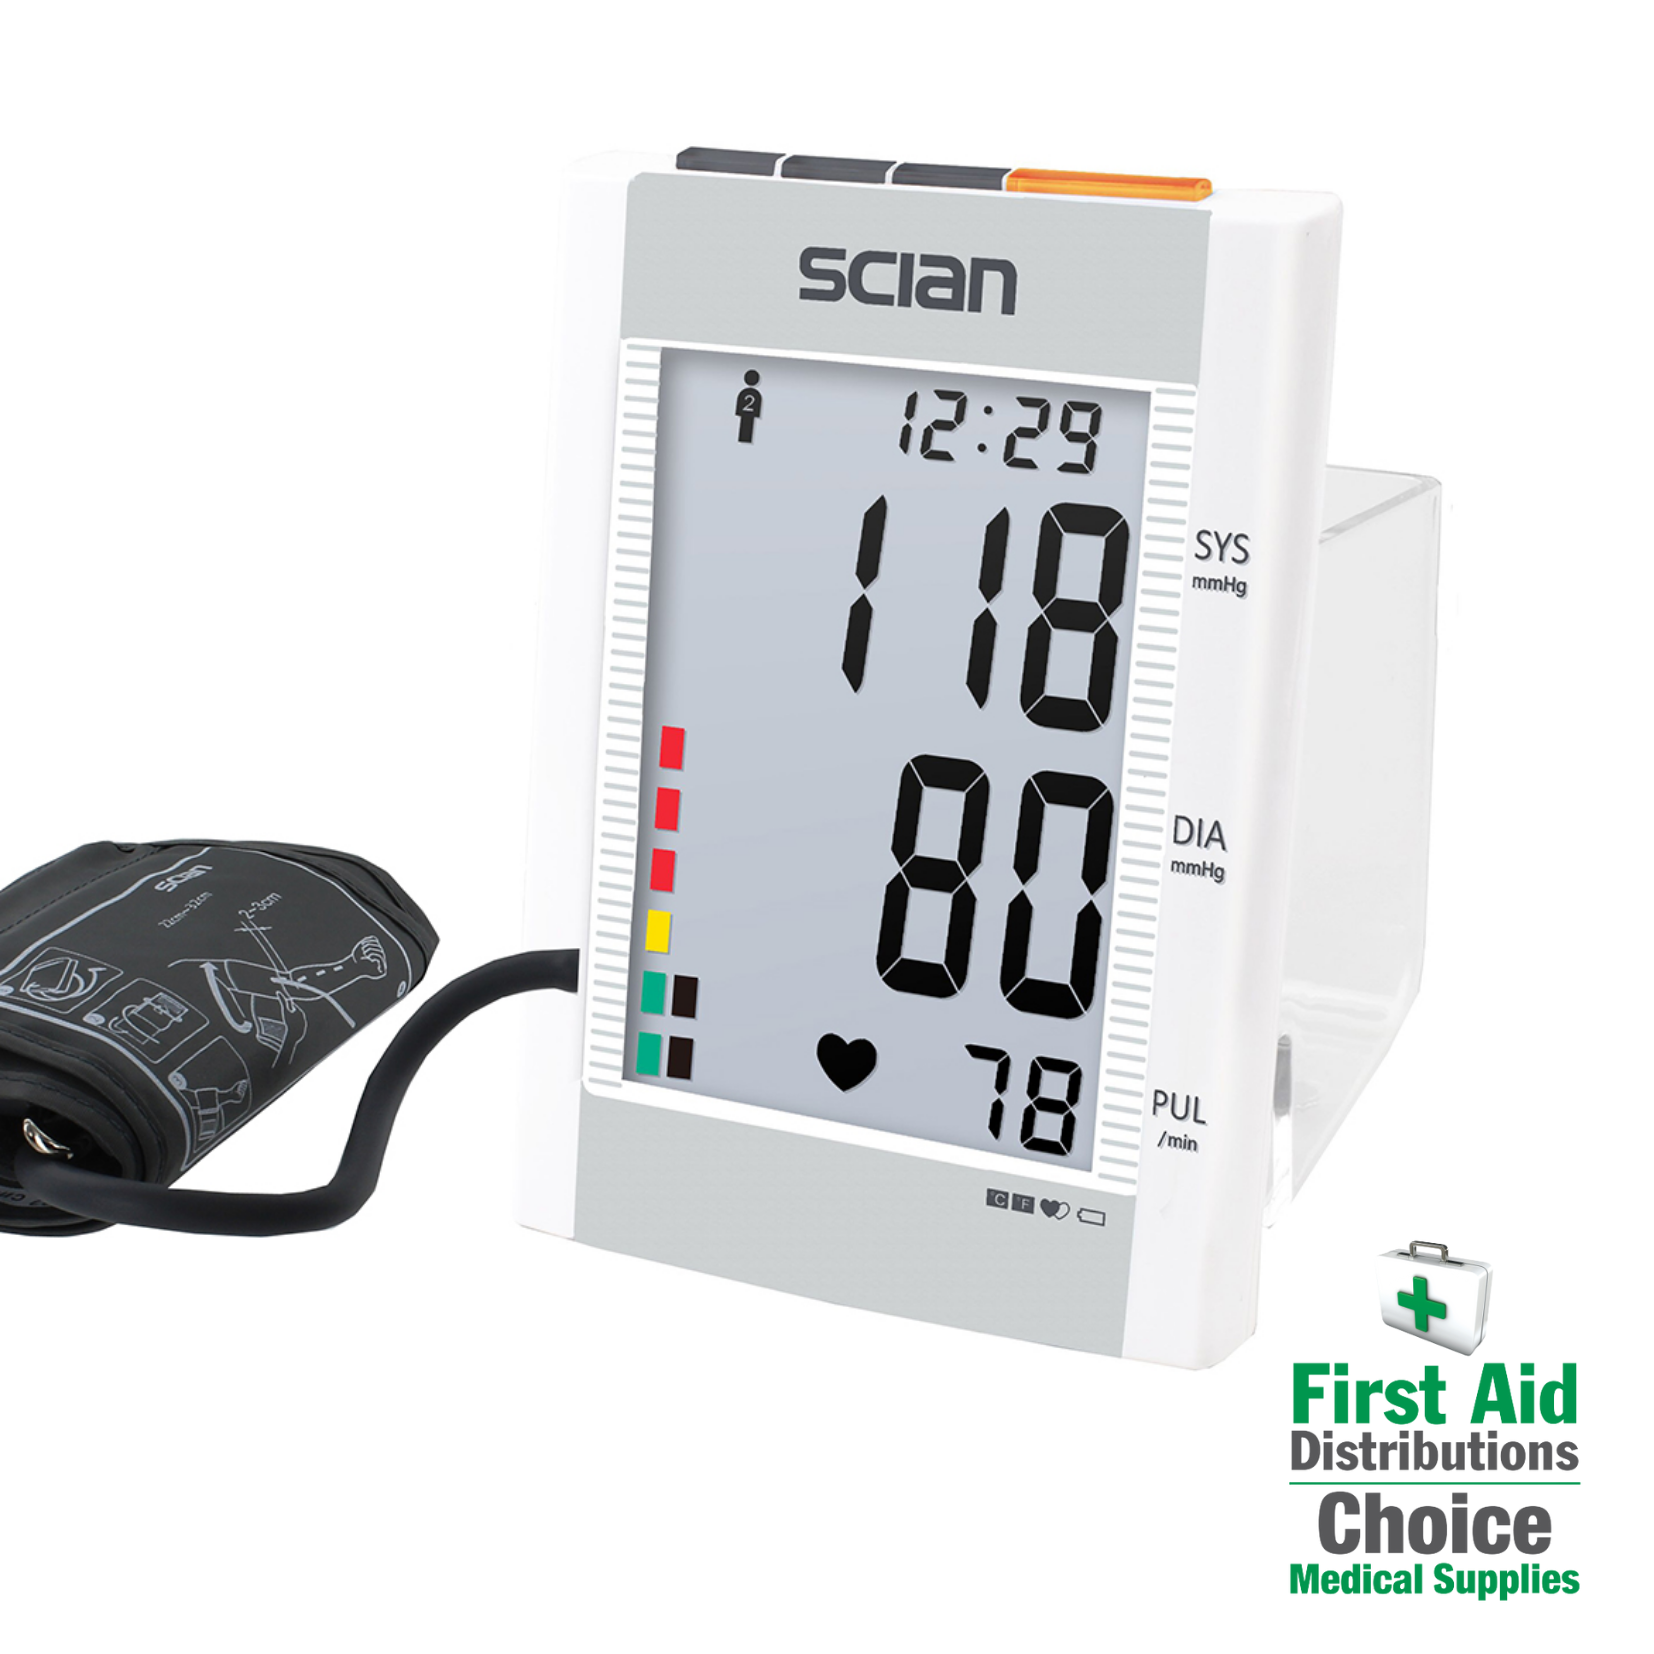 collections/Scian_Blood_Pressure_Monitor_Open_First_Aid_Distributions.png